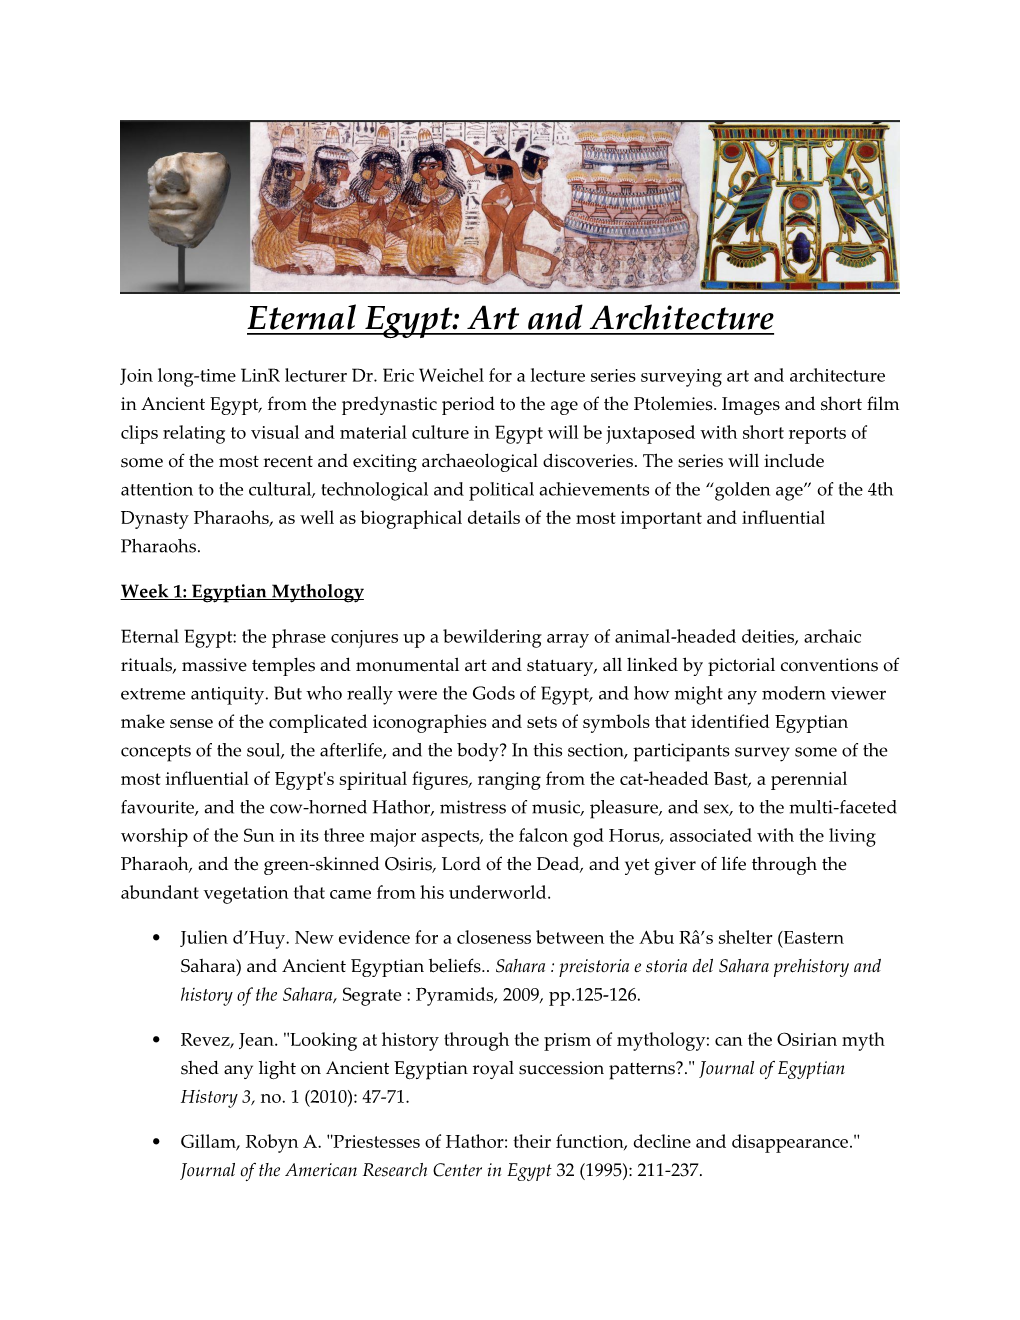 Eternal Egypt: Art and Architecture